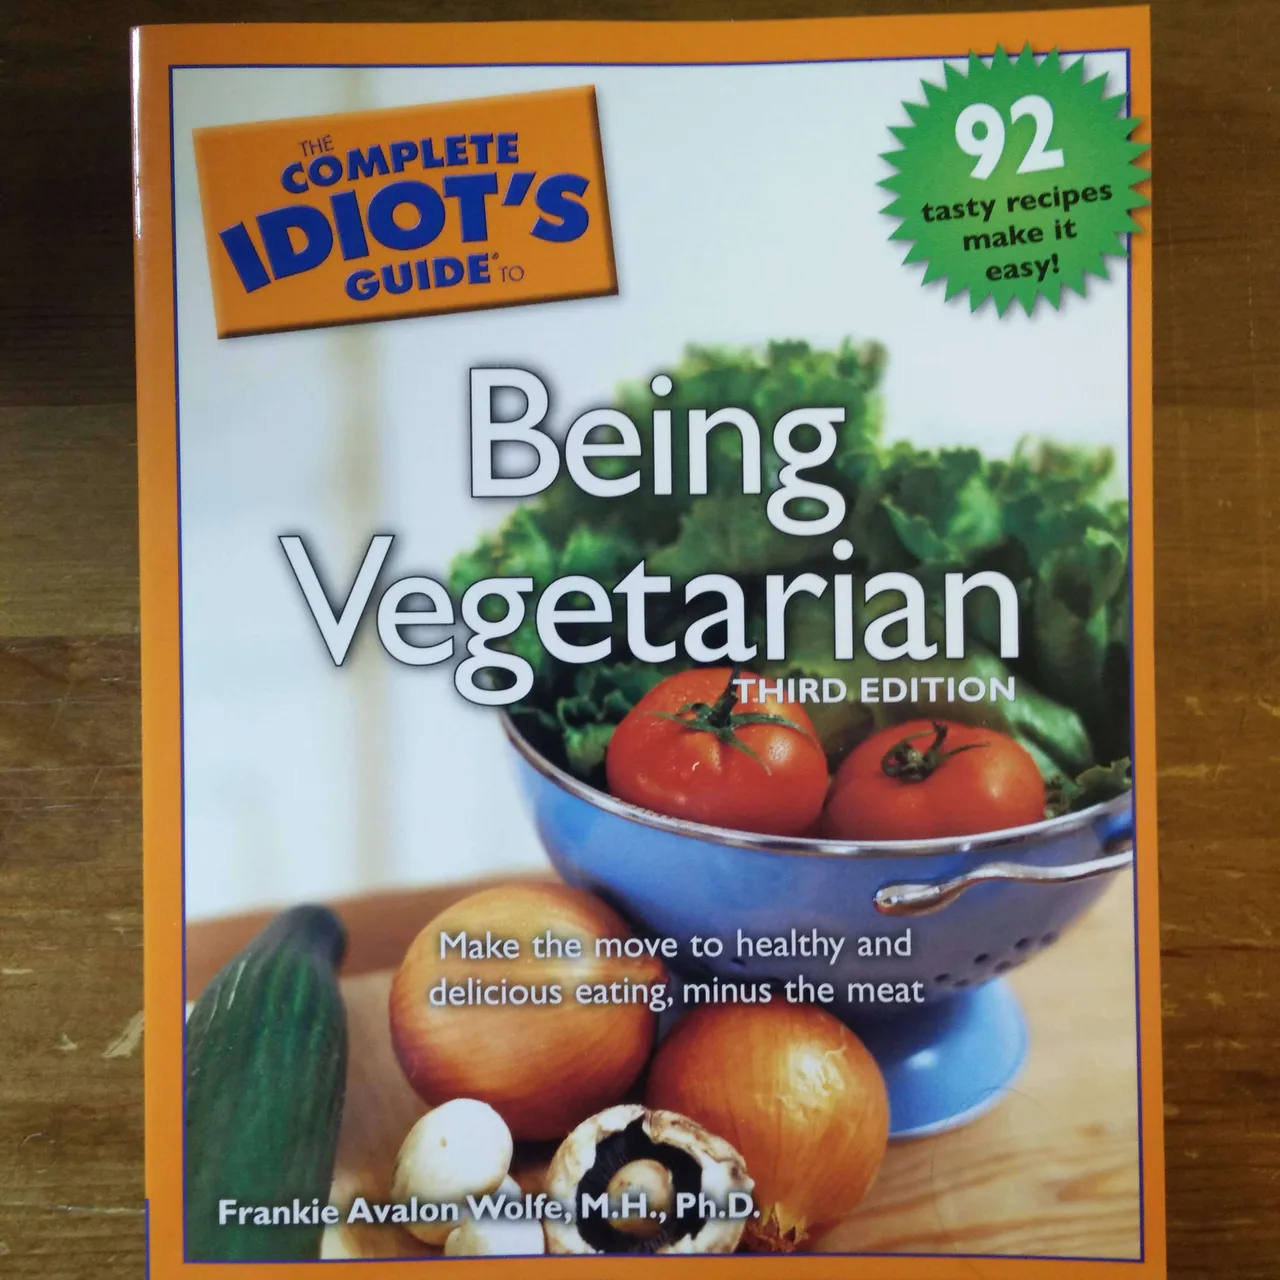 The Complete Idiot's Guide to Being Vegetarian 3rd Edition photo 1